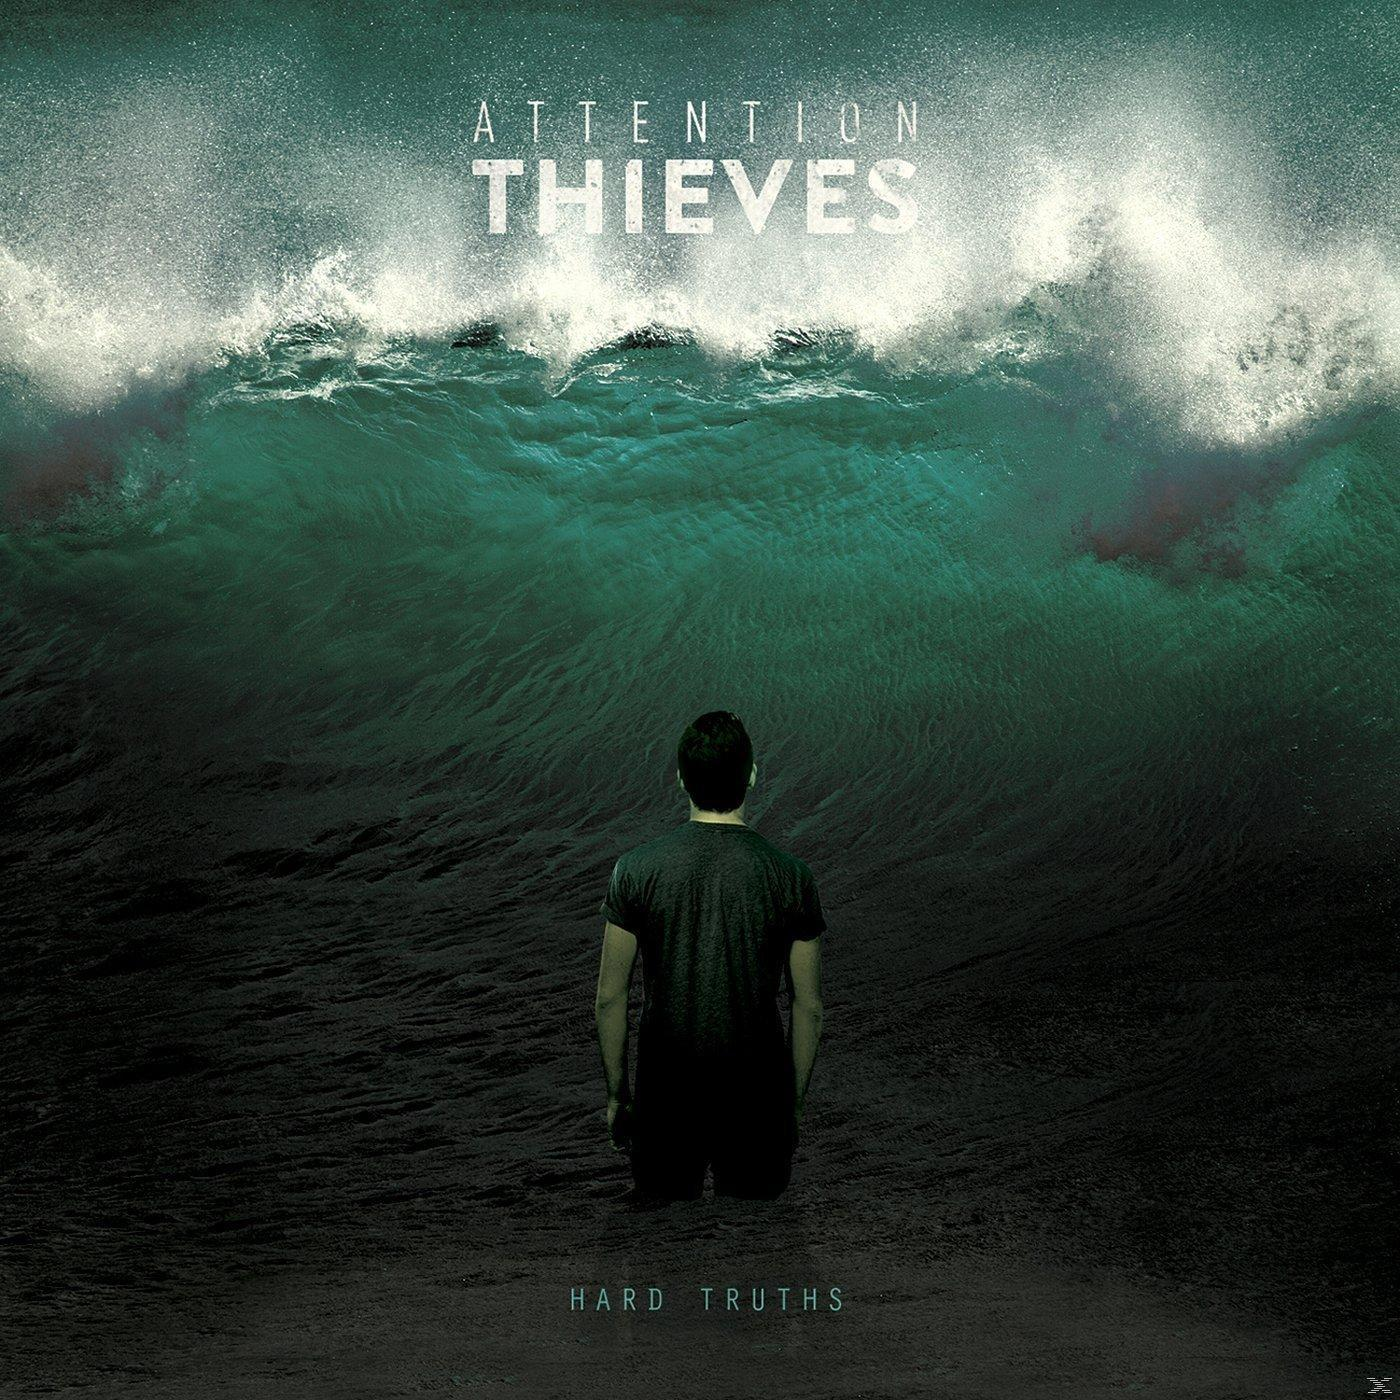 Attention Thieves - - Truths (CD) Hard